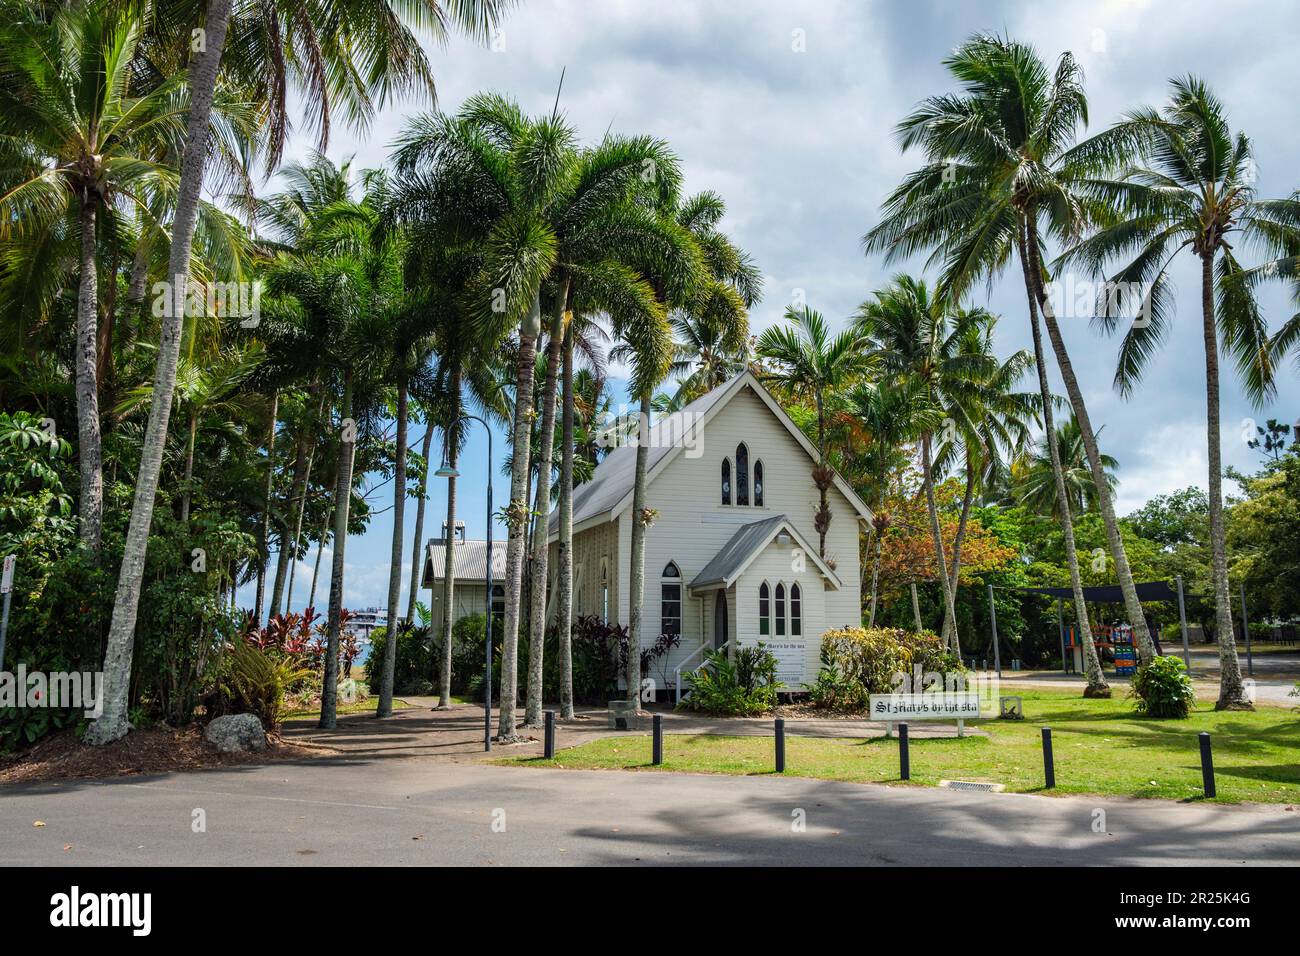 Church of St Mary's by the Sea, Port Douglas, Queensland, Australien Stockfoto